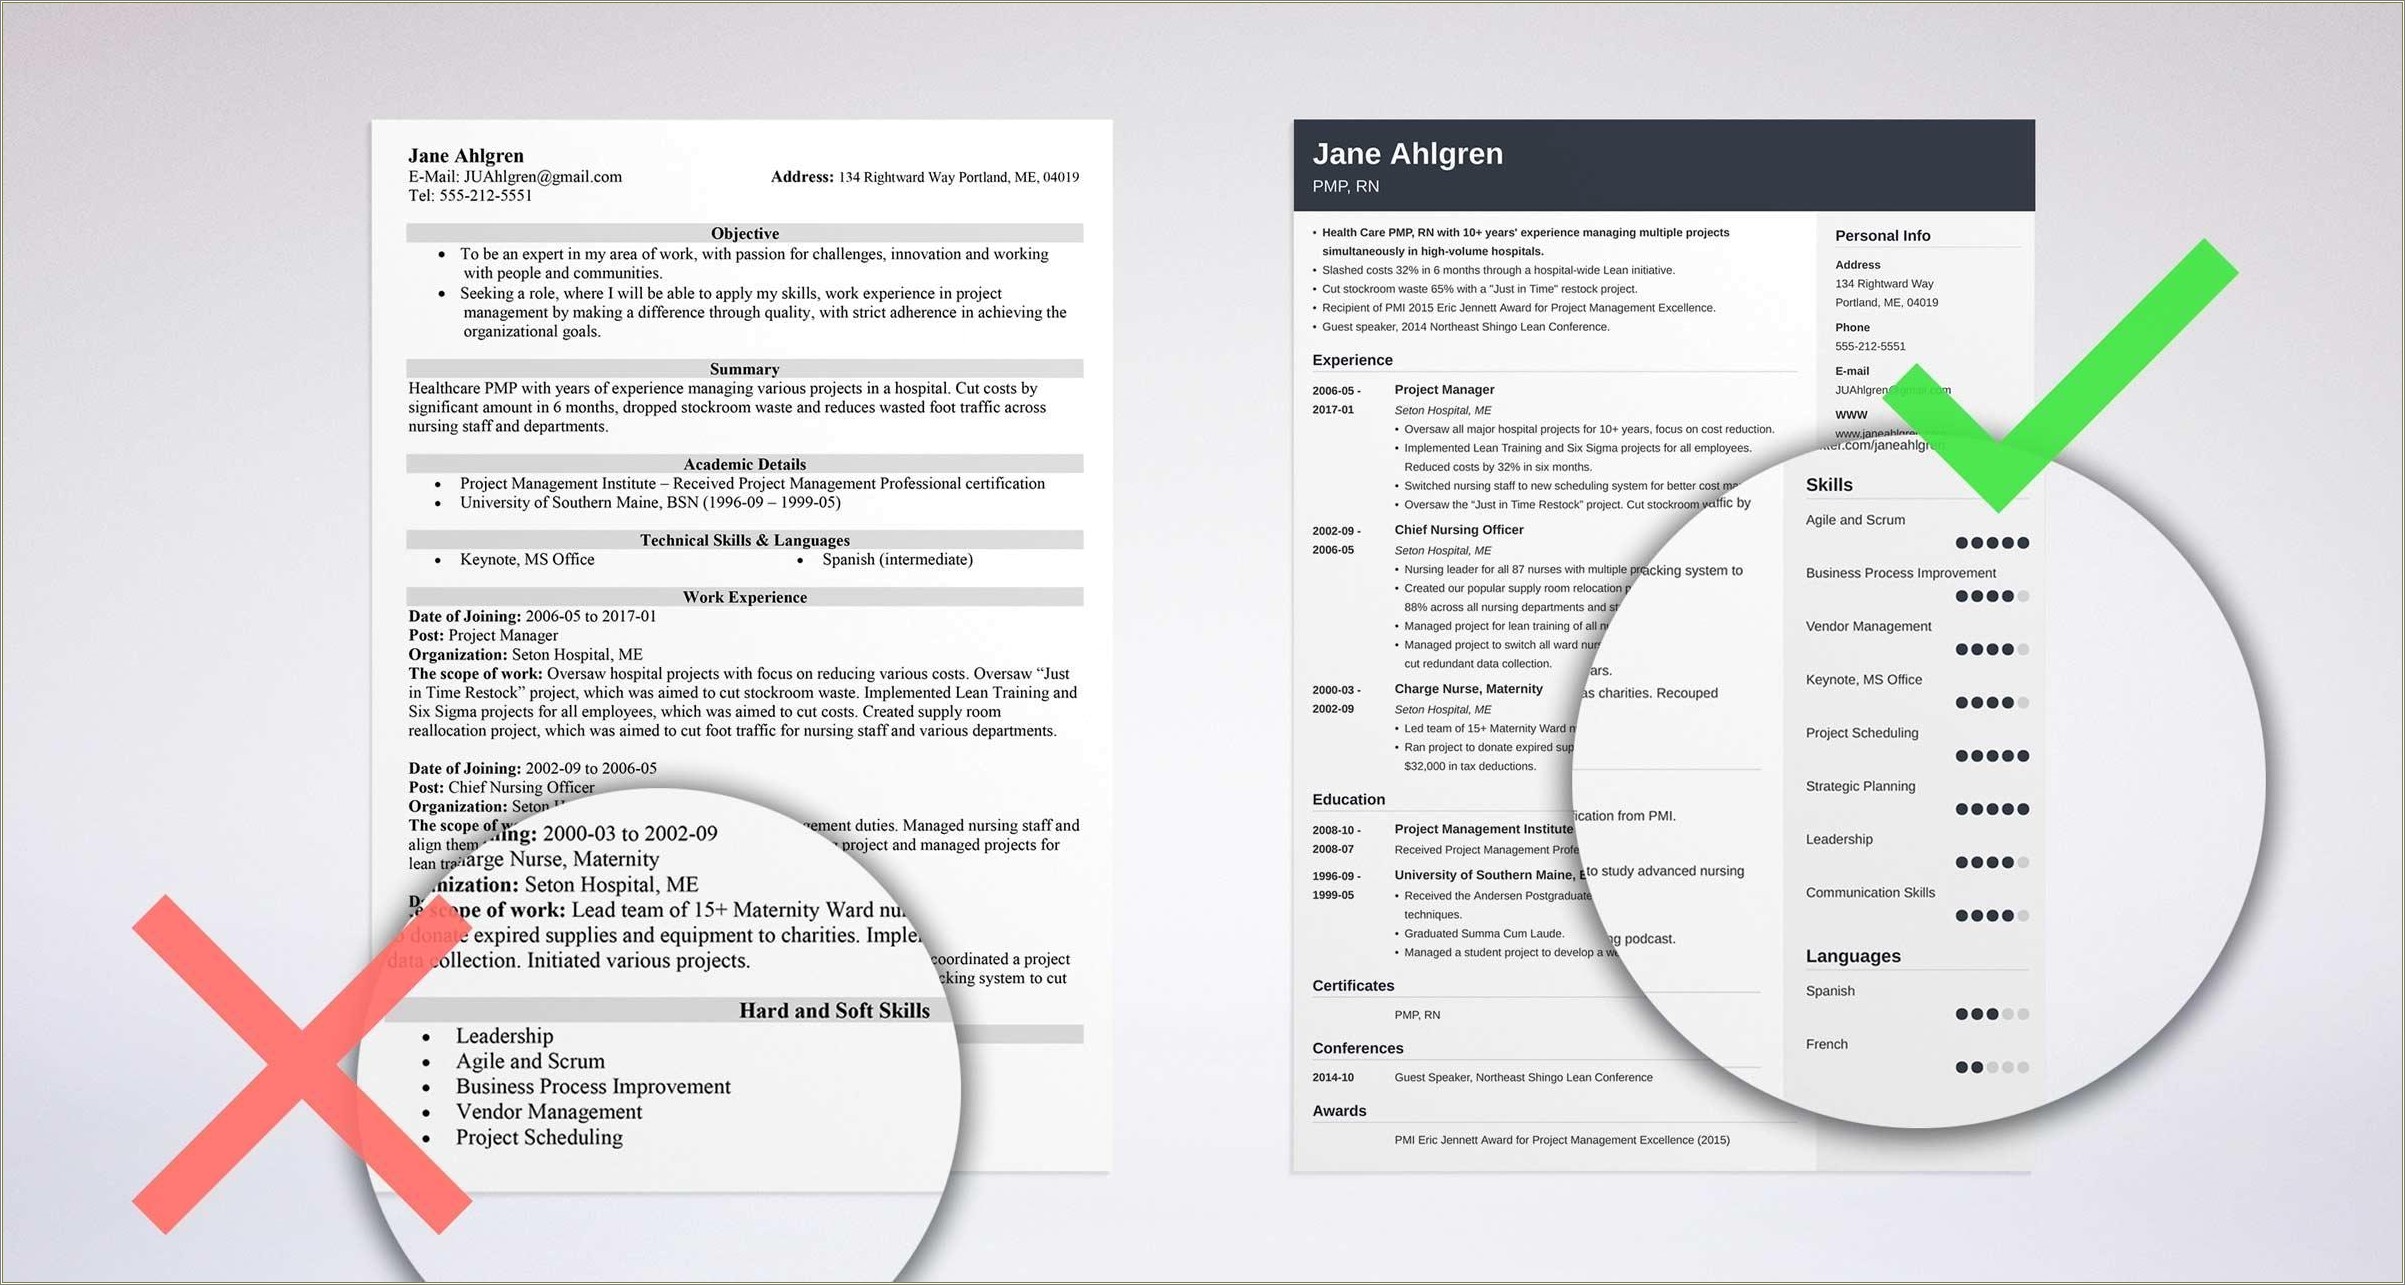 Ideas For Skills And Abilities Section Of Resume